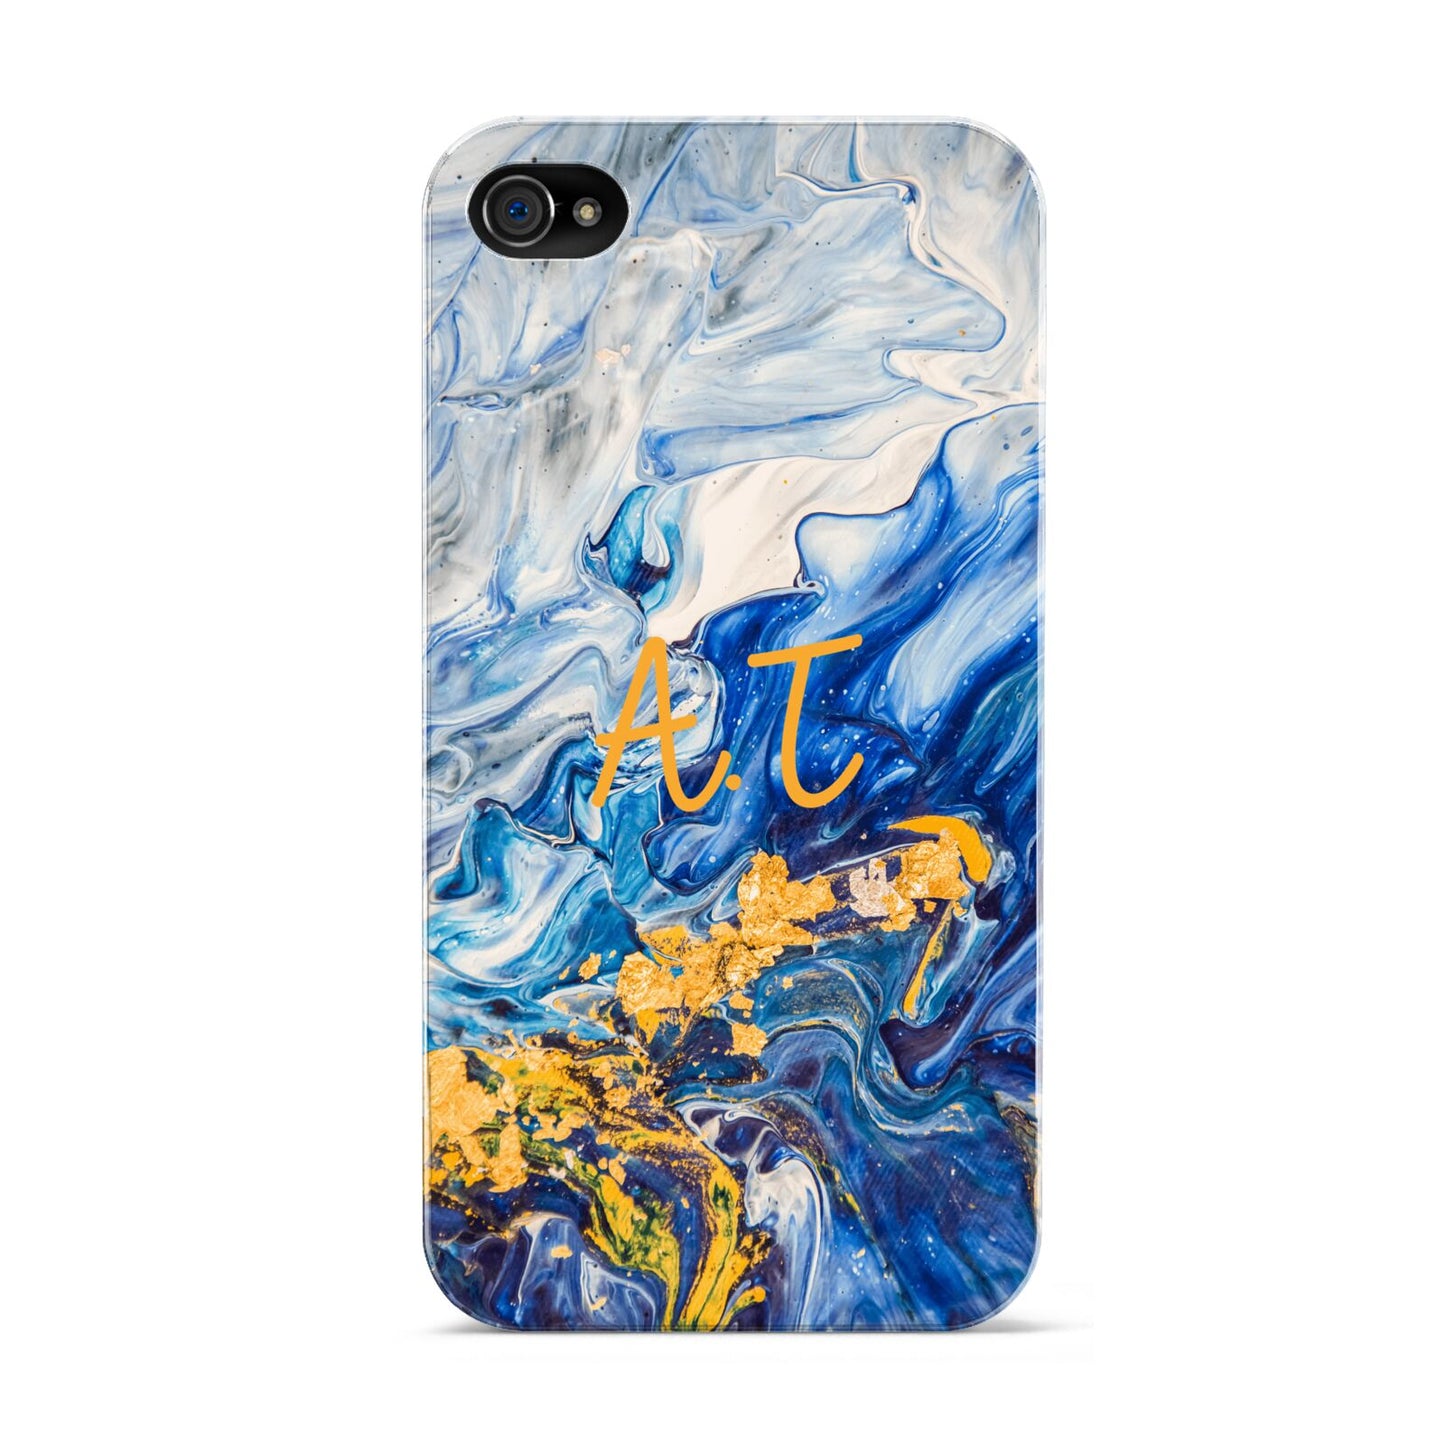 Blue And Gold Marble Apple iPhone 4s Case